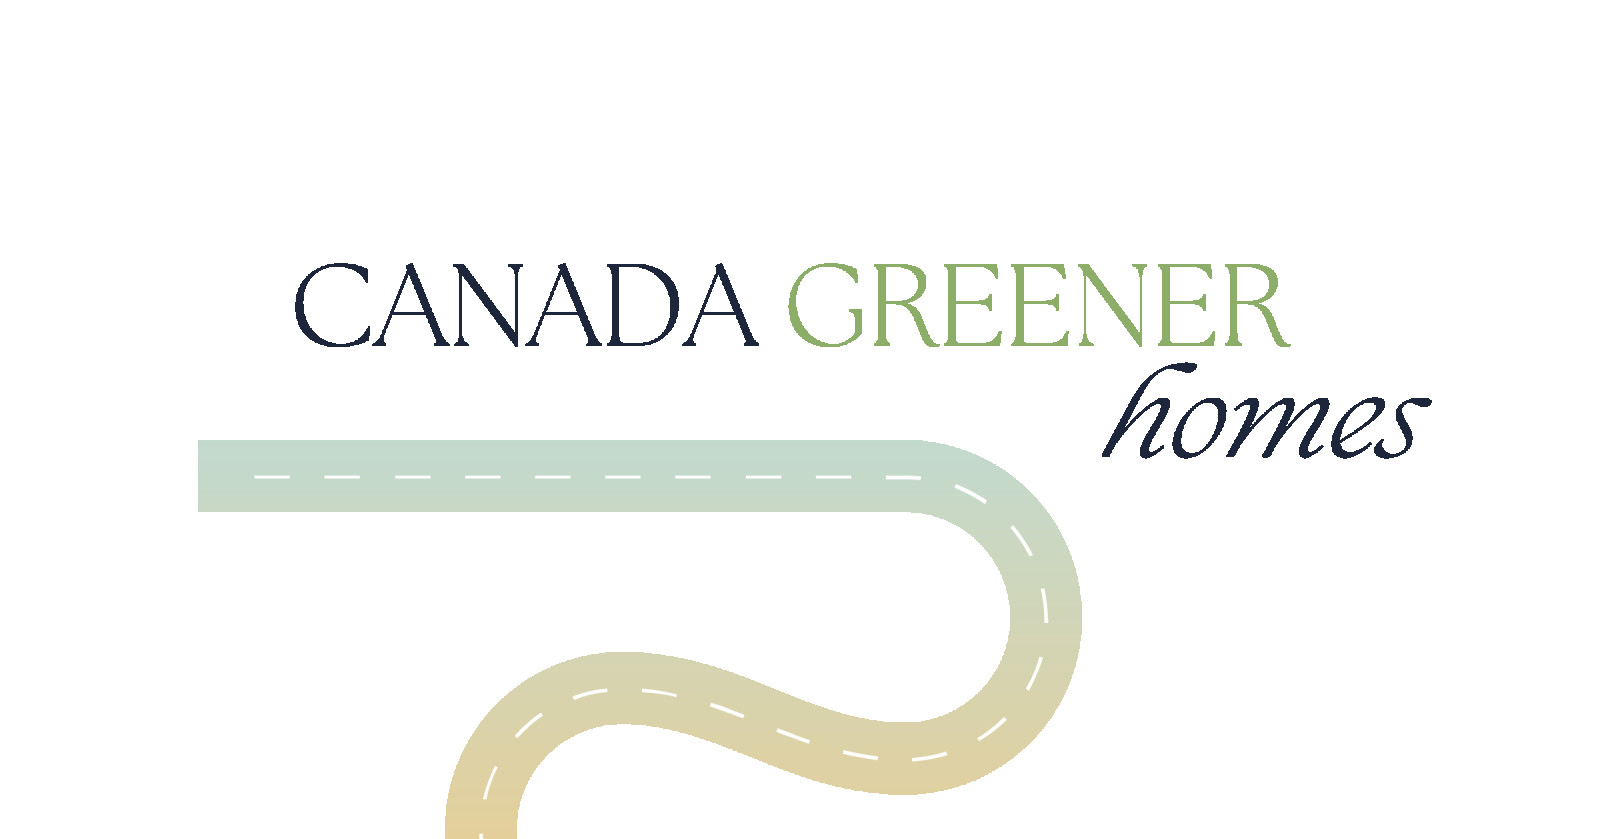 Canada Greener Homes - A Quick Overview